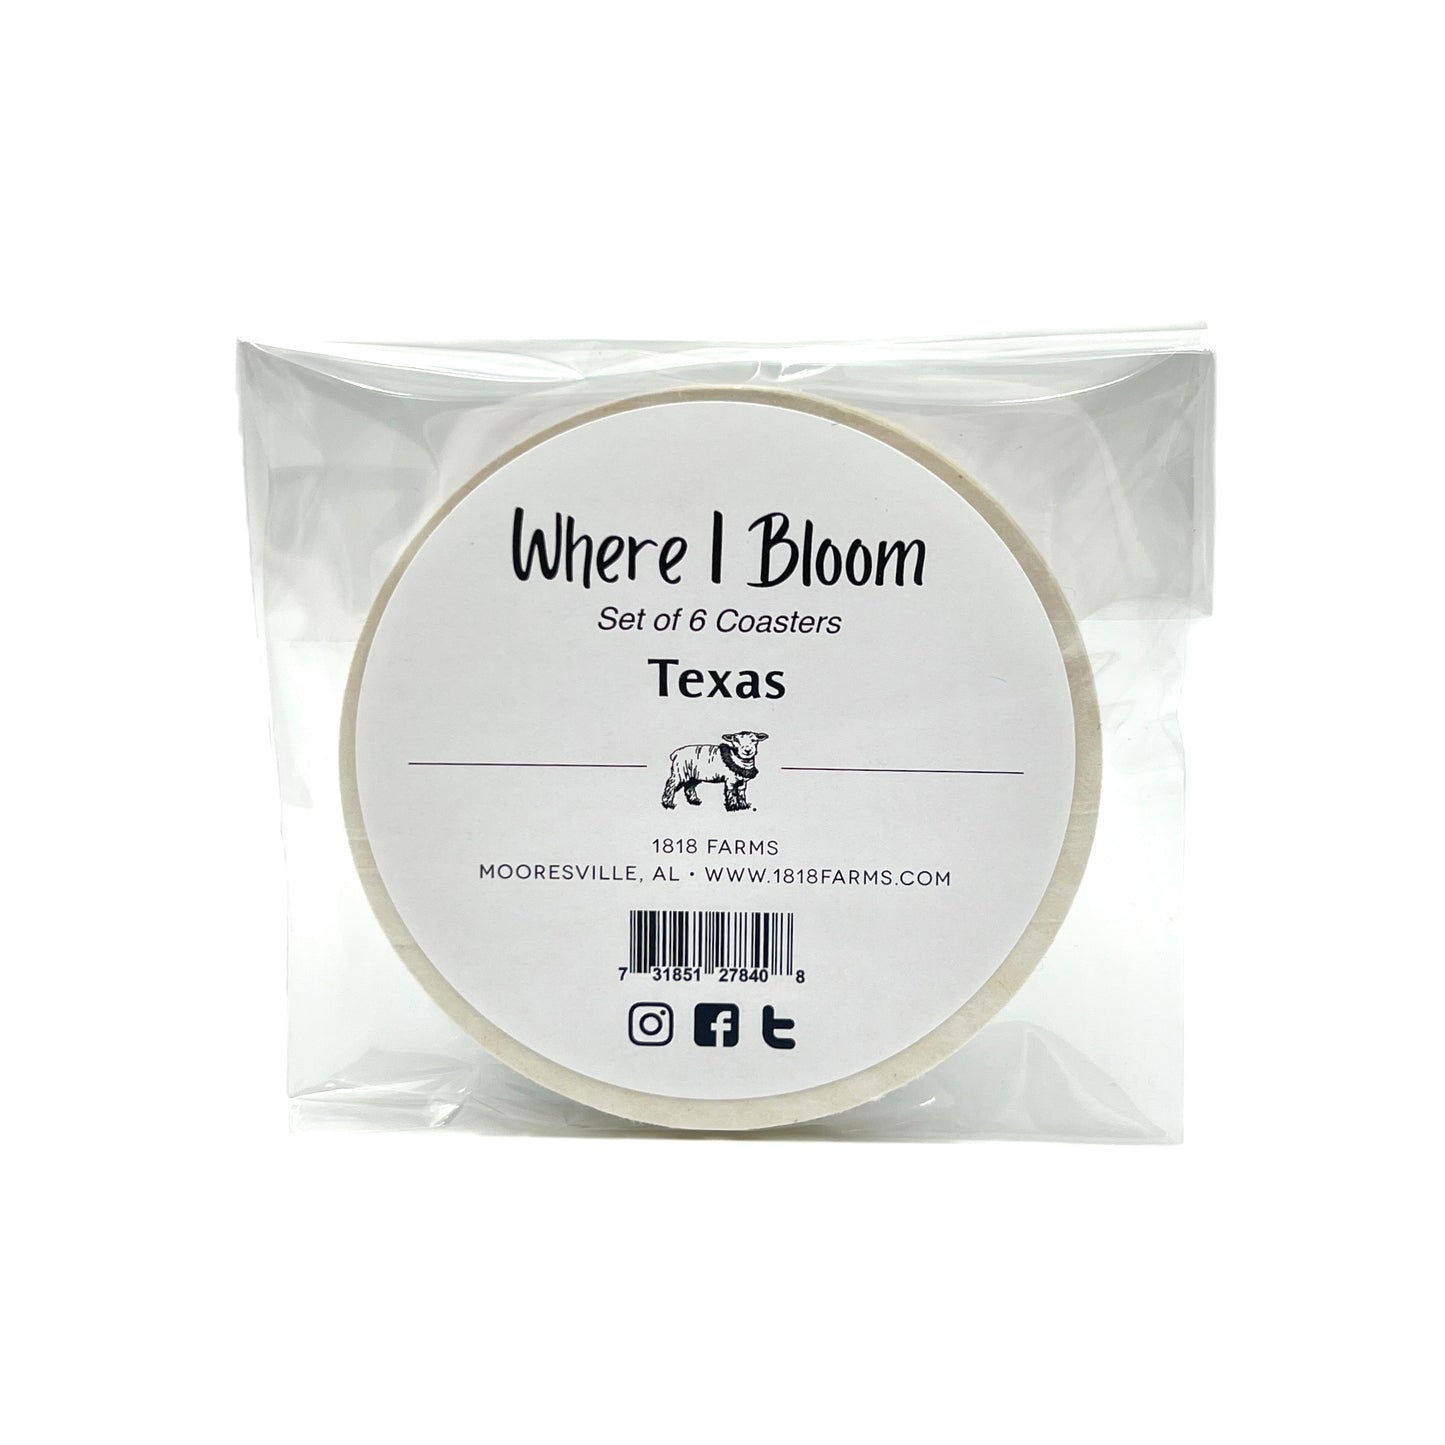 Texas Themed Coasters (Set of 6)  - "Where I Bloom" Collection Coaster 1818 Farms   